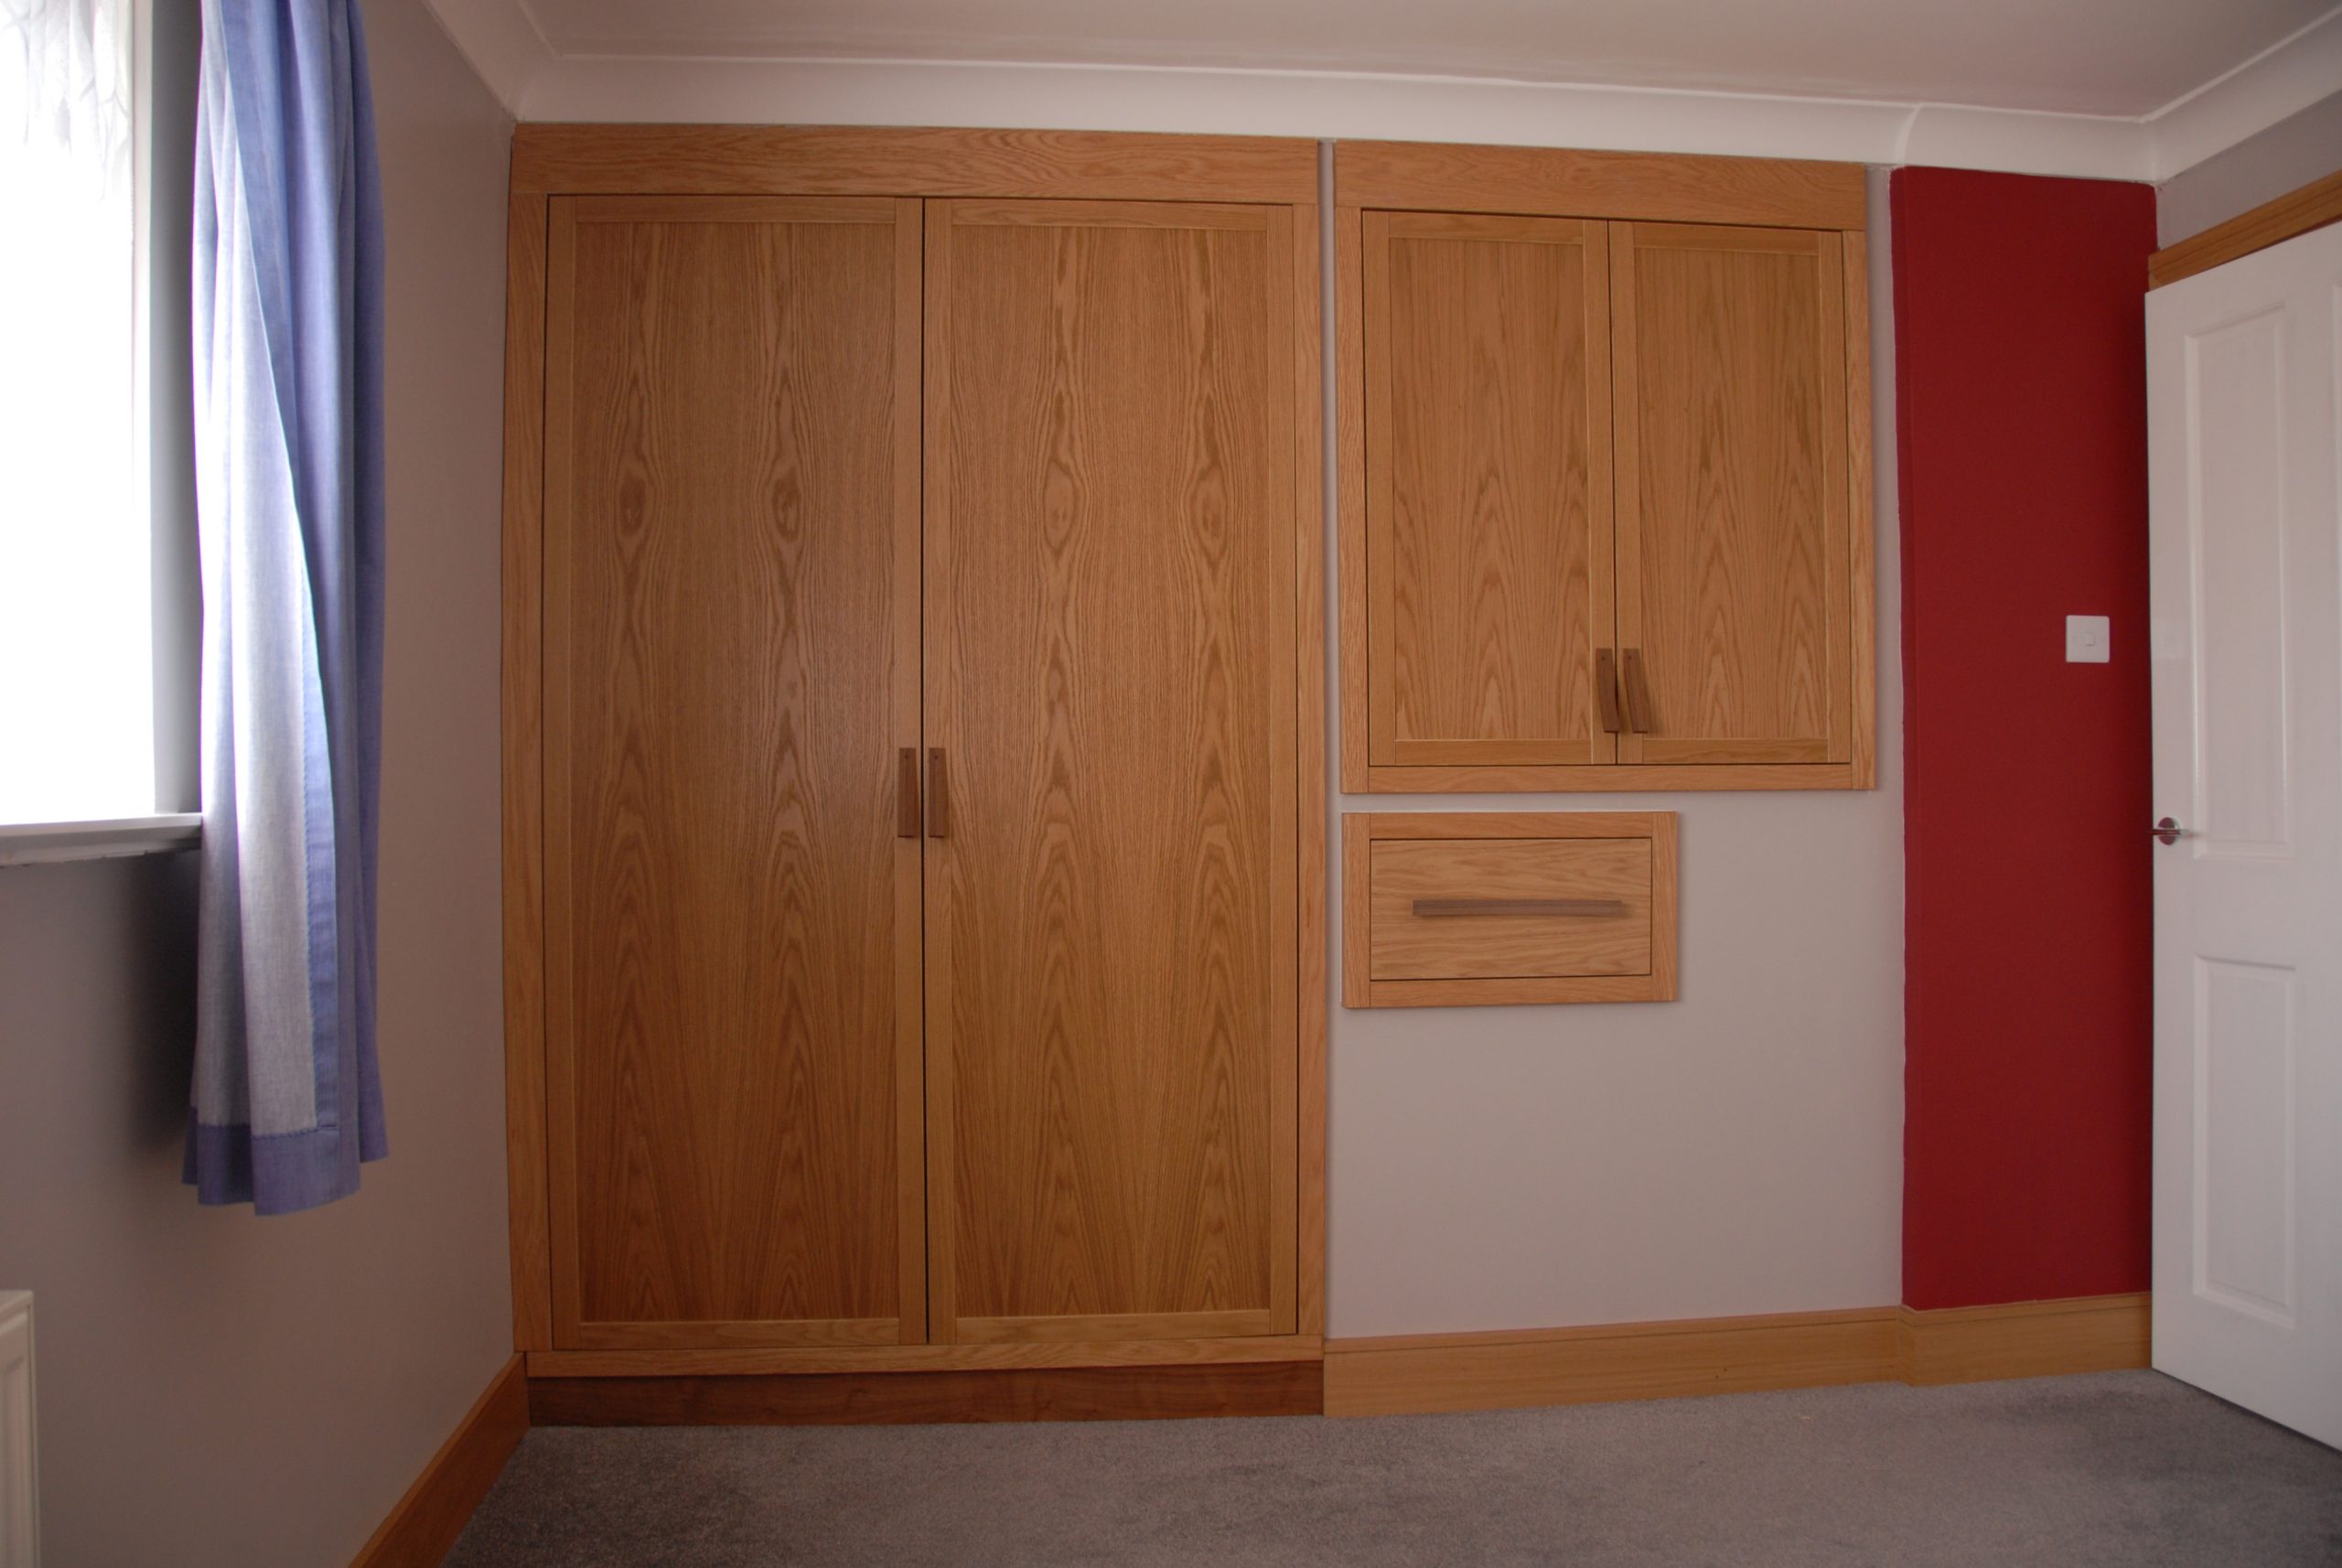 Oak and American black walnut wardrobes. over stairs maximum storage. Laminated curved walnut handles and blum soft close external and internal drawers and a haffel pull down hanging rail.